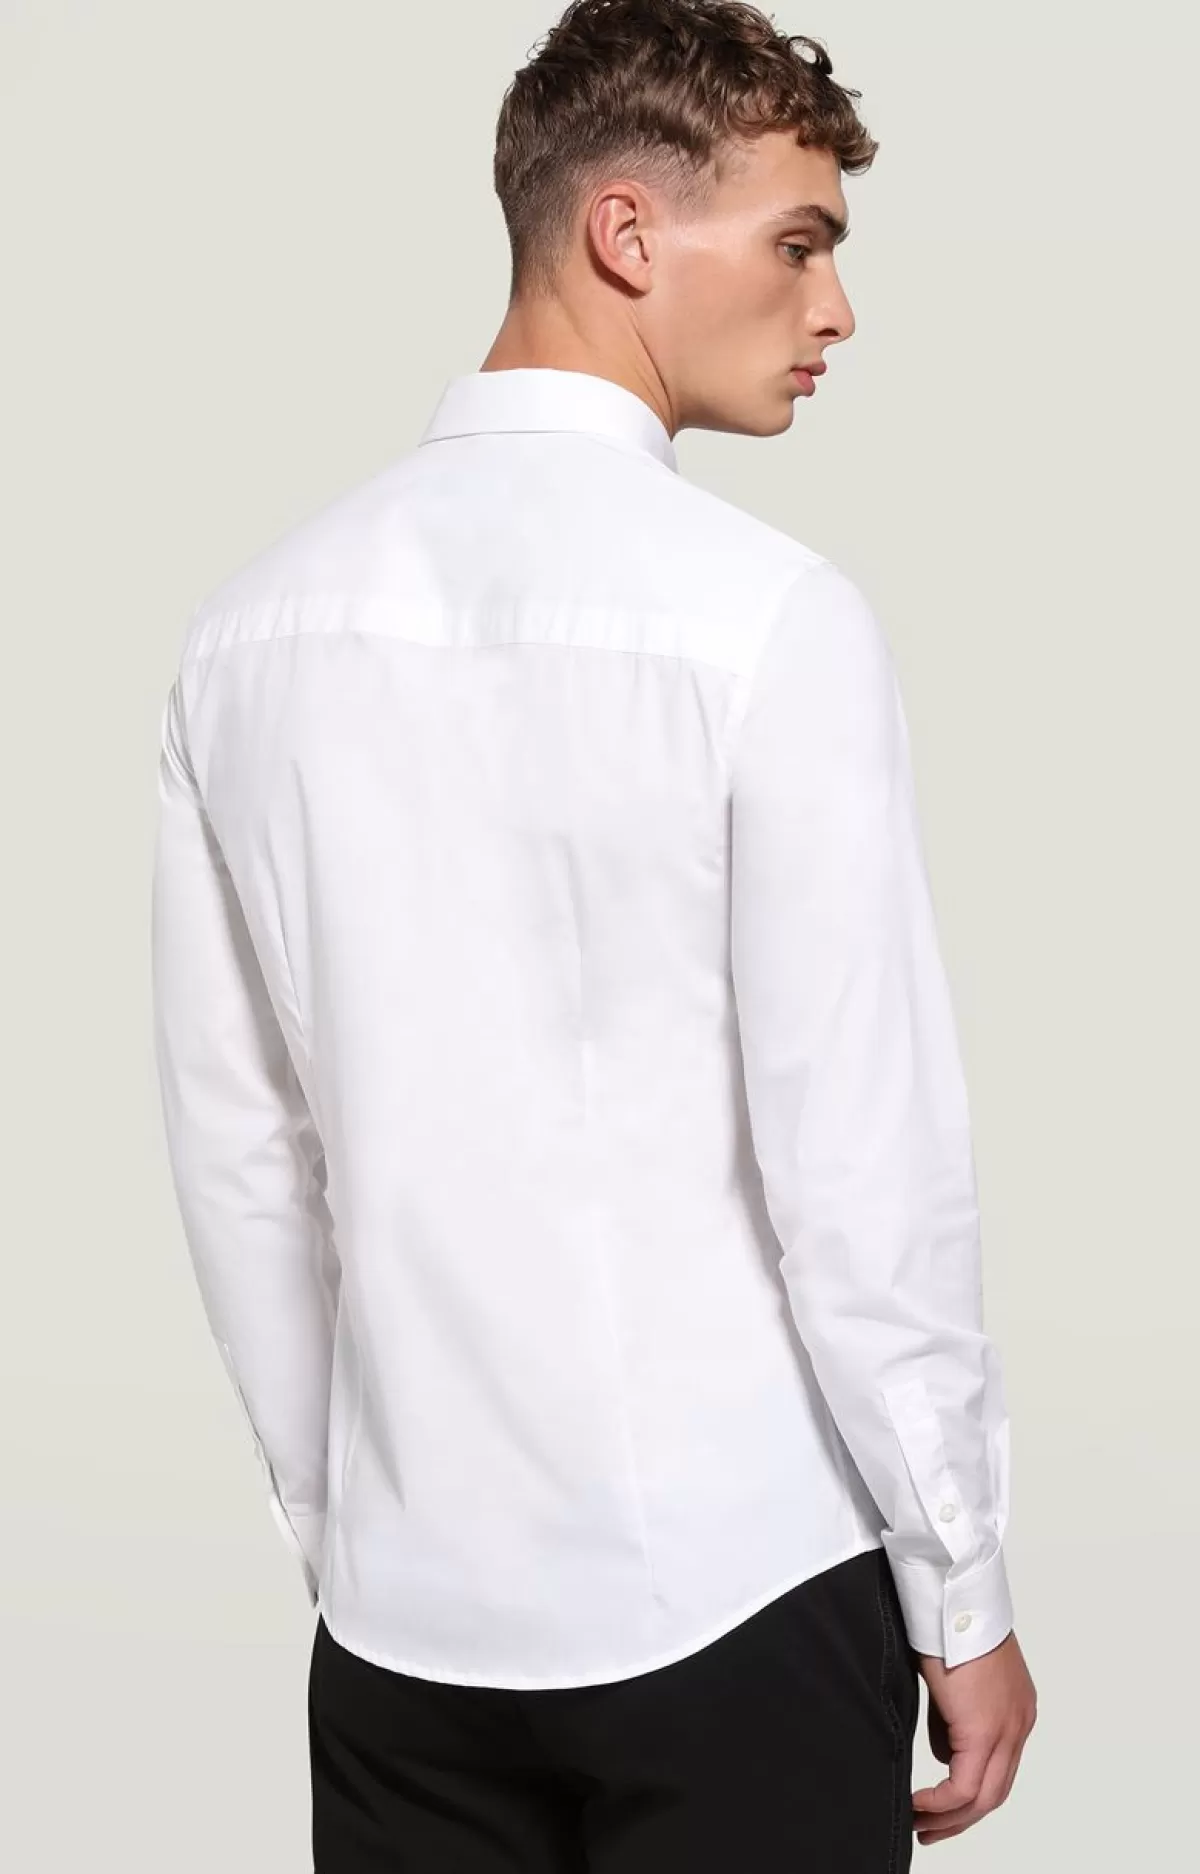 Bikkembergs Men'S Slim Fit Shirt With Matching Tape Optical White Best Sale